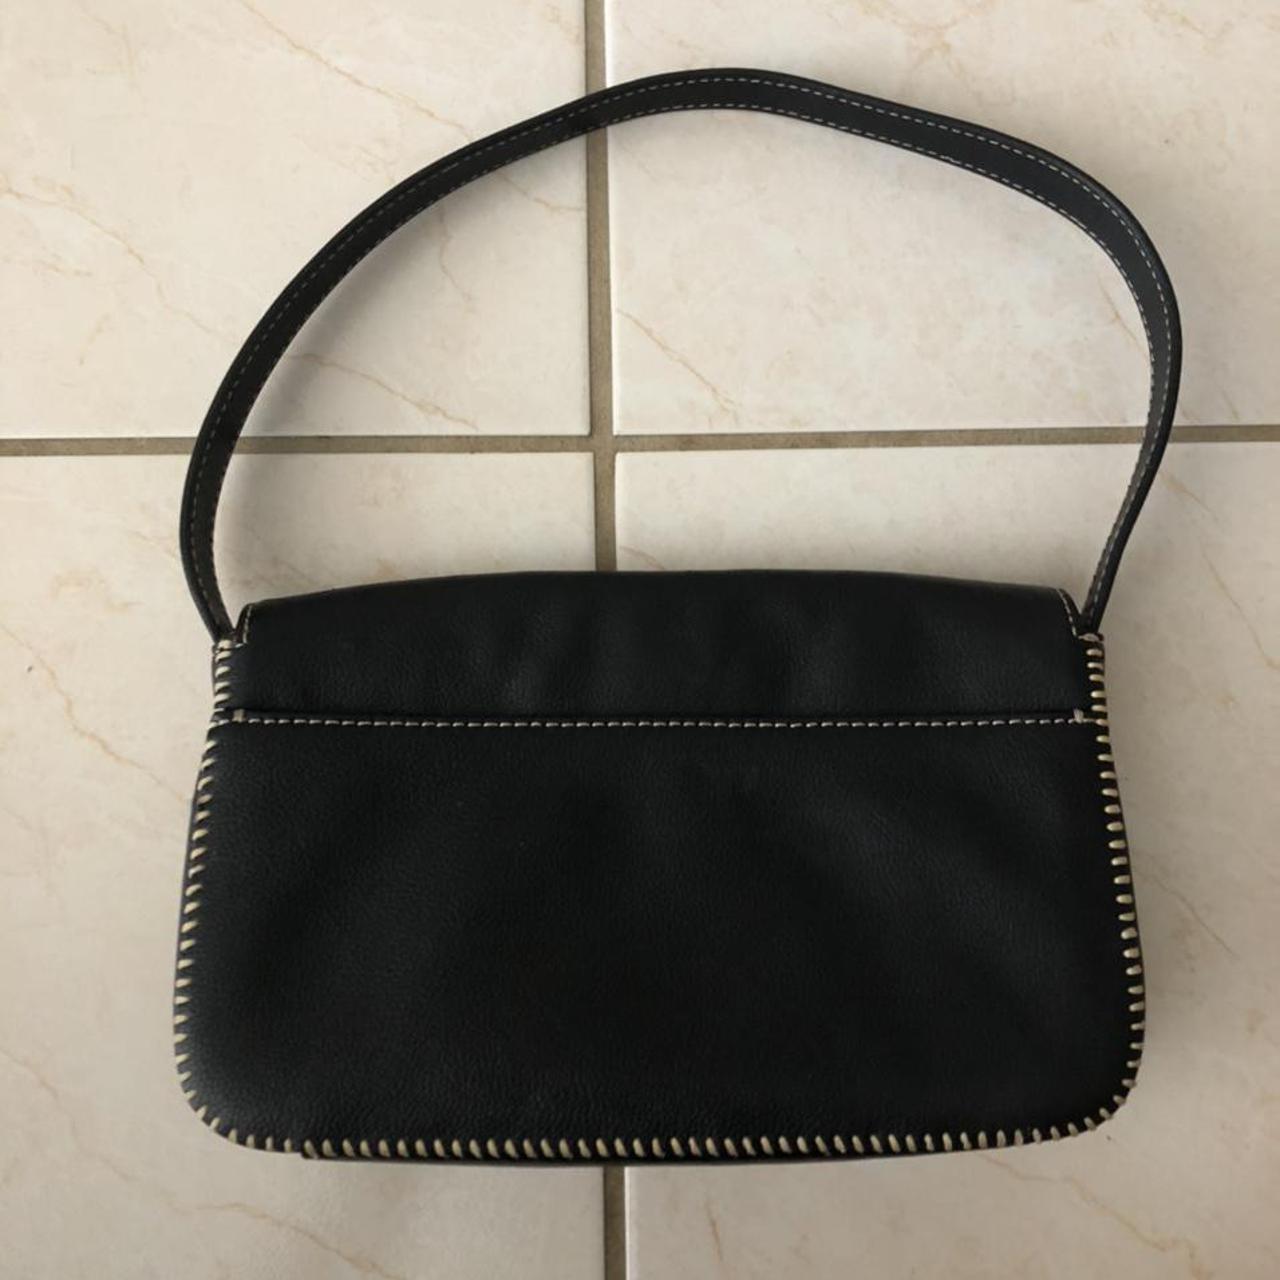 Product Image 2 - Ann Taylor purse 🖤 
•
In